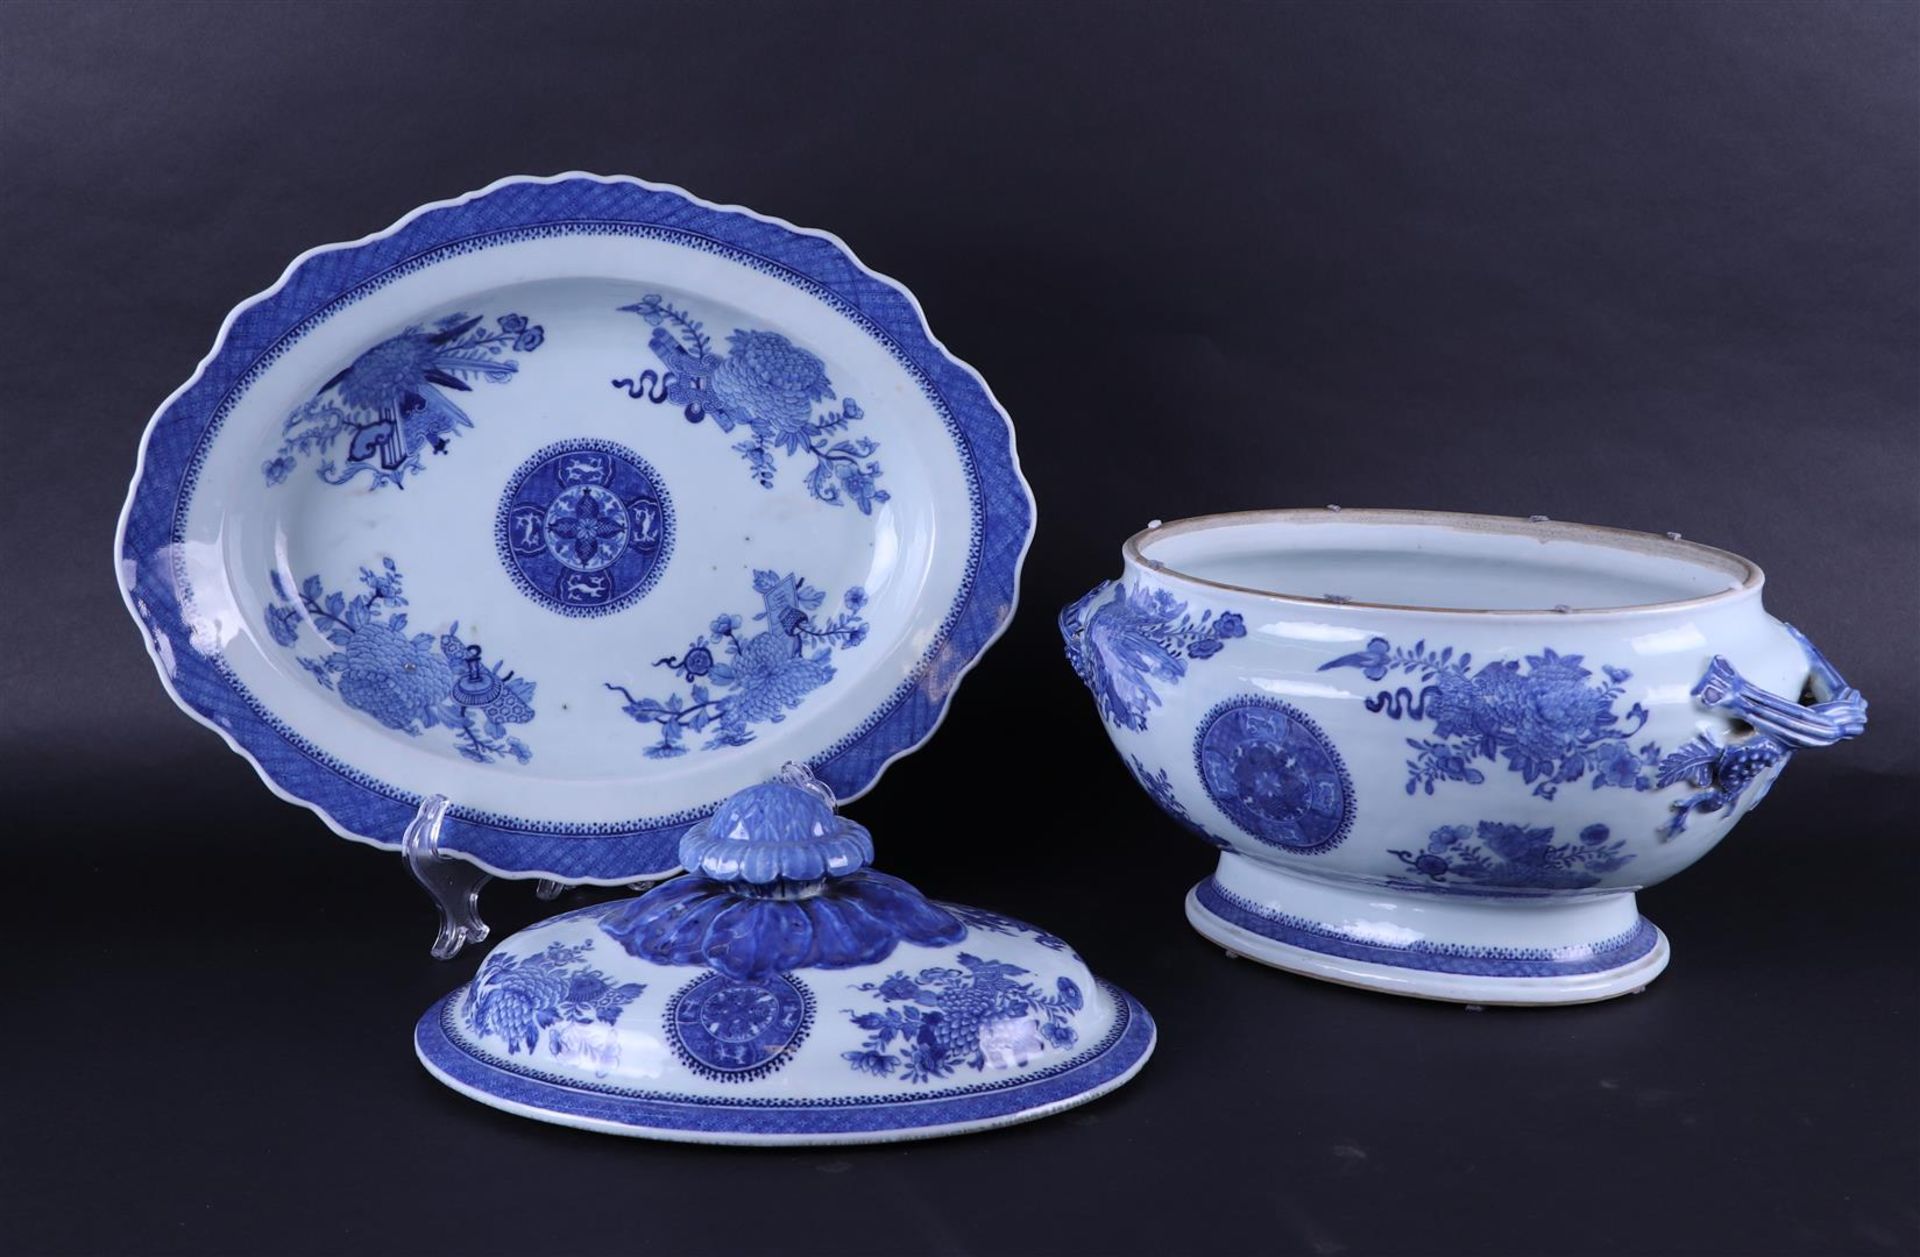 A large porcelain terinne on a lower dish. Floral decoration. China, Qianlong.
40 x 28 cm. - Image 2 of 3